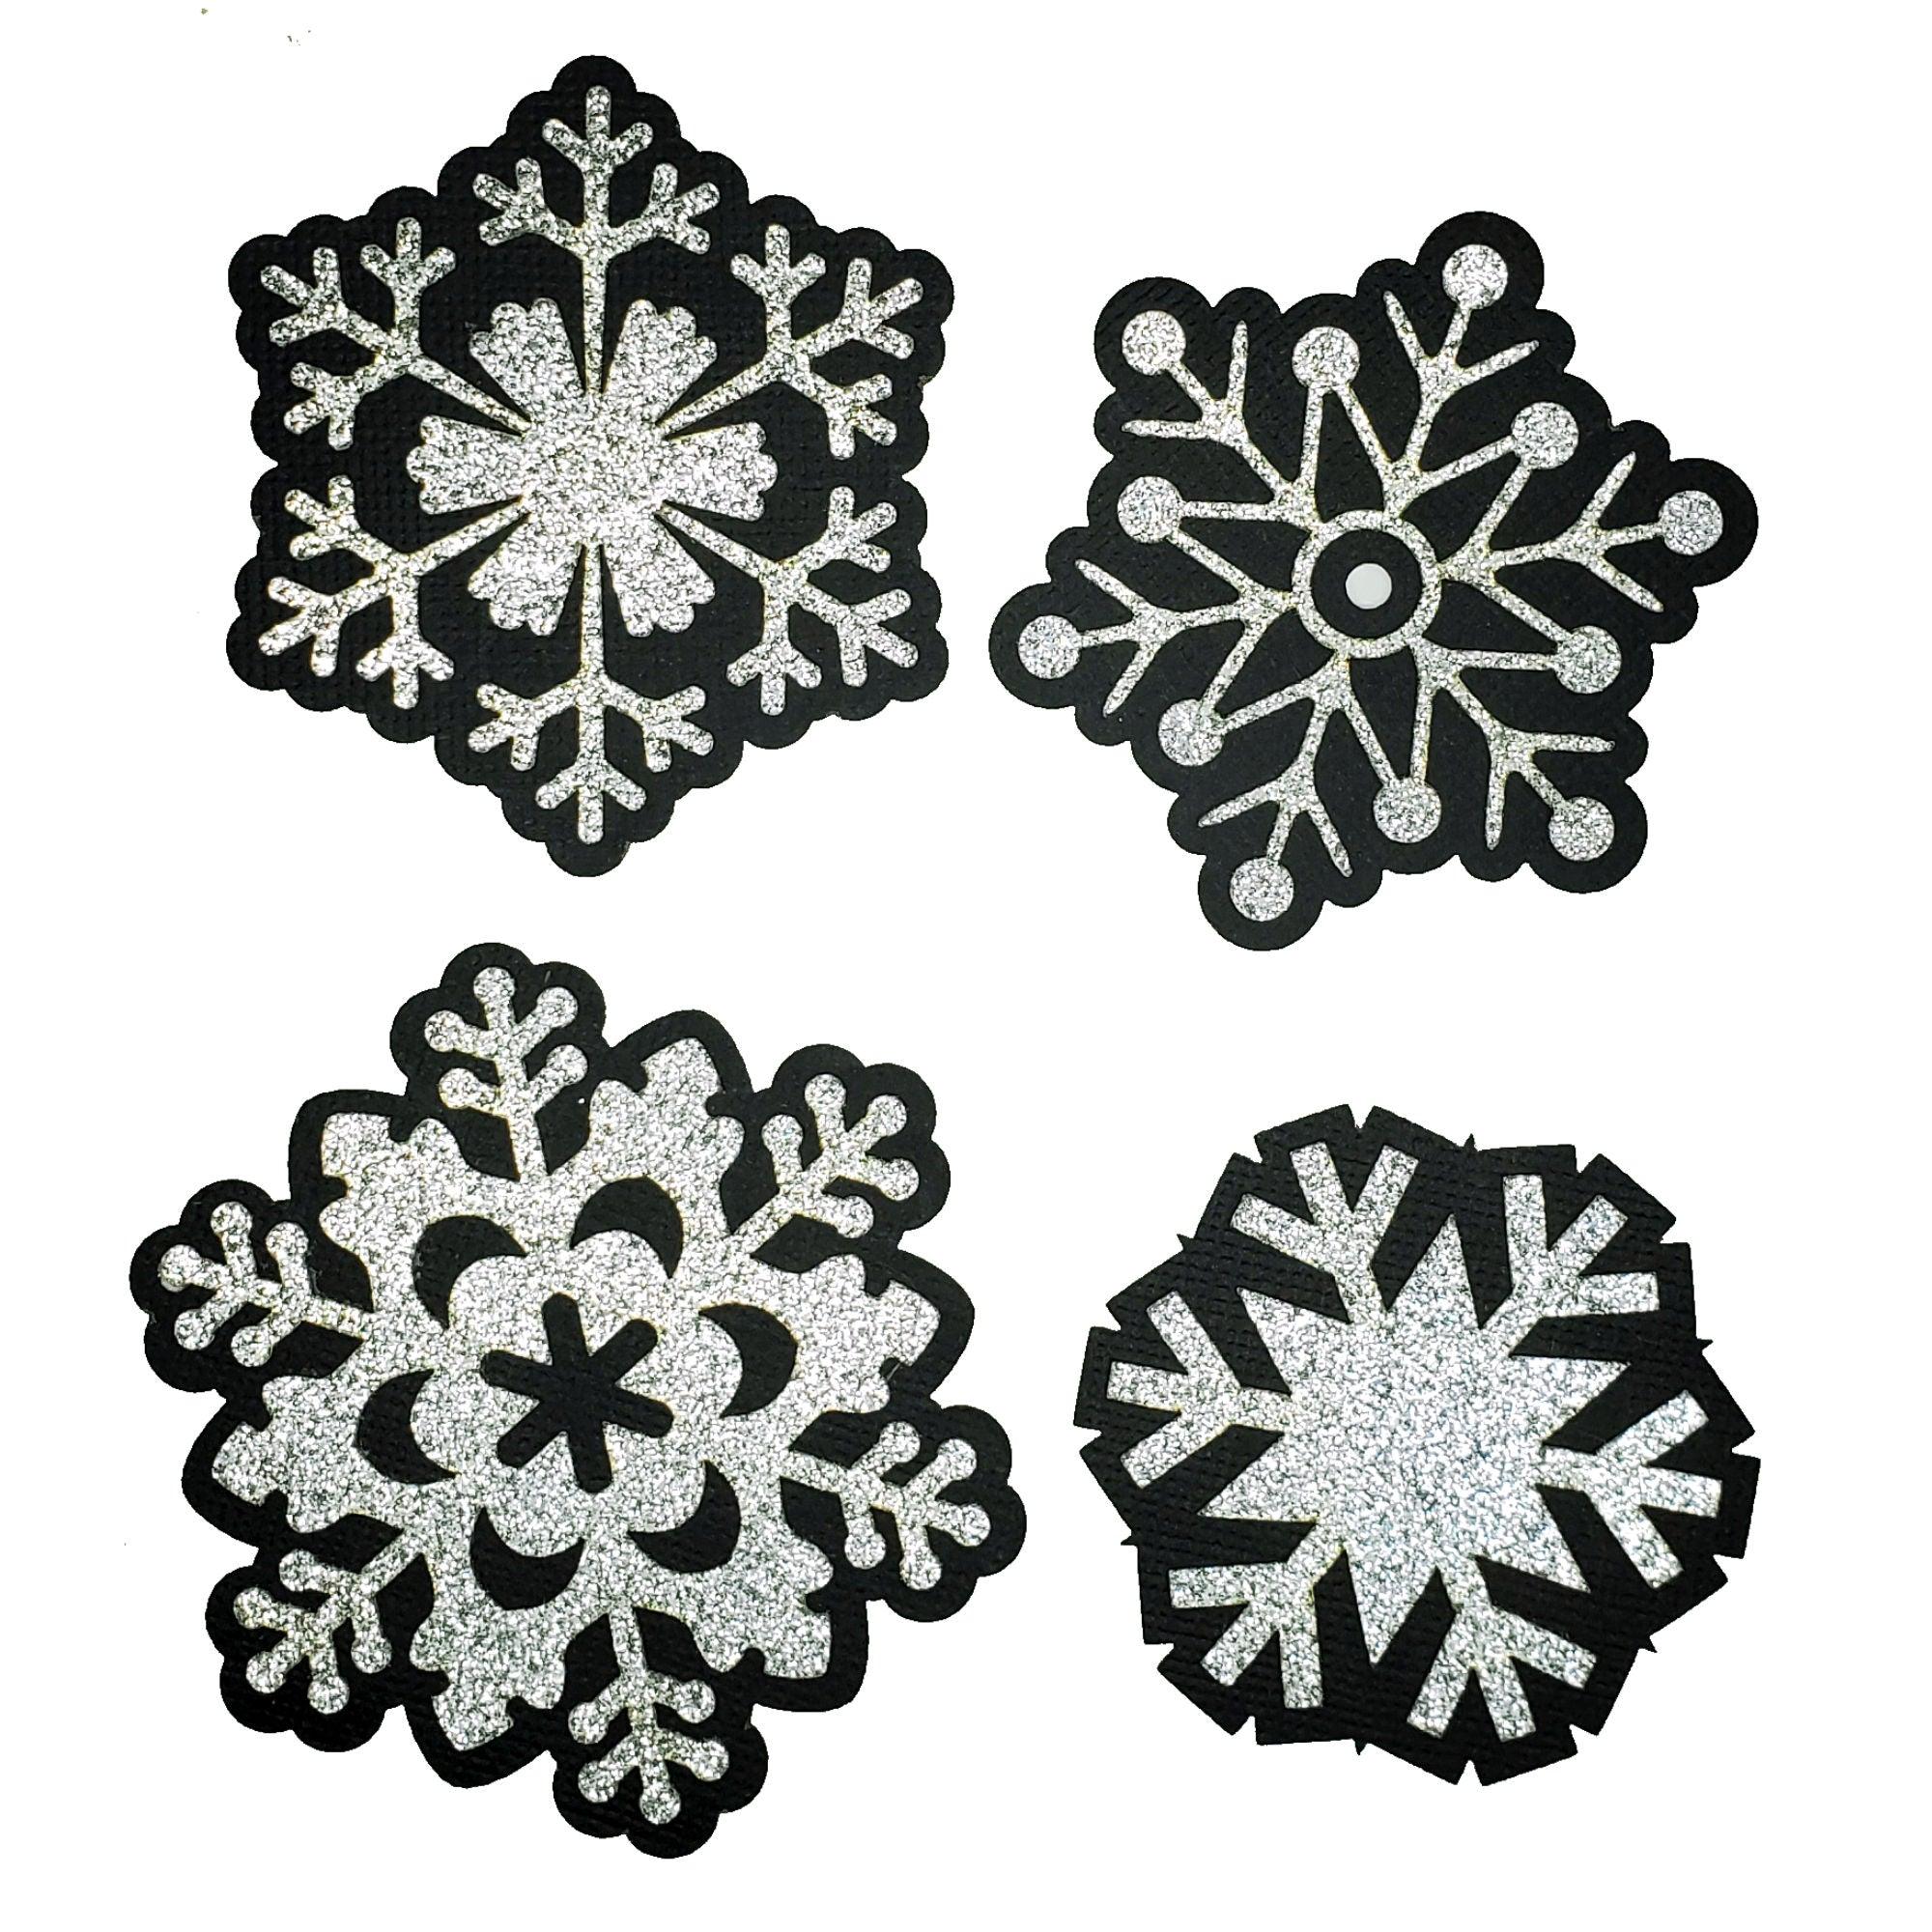 Black Glittered Snowflakes 2 x 3 Fully-Assembled Laser Cut Scrapbook Embellishments by SSC Laser Designs